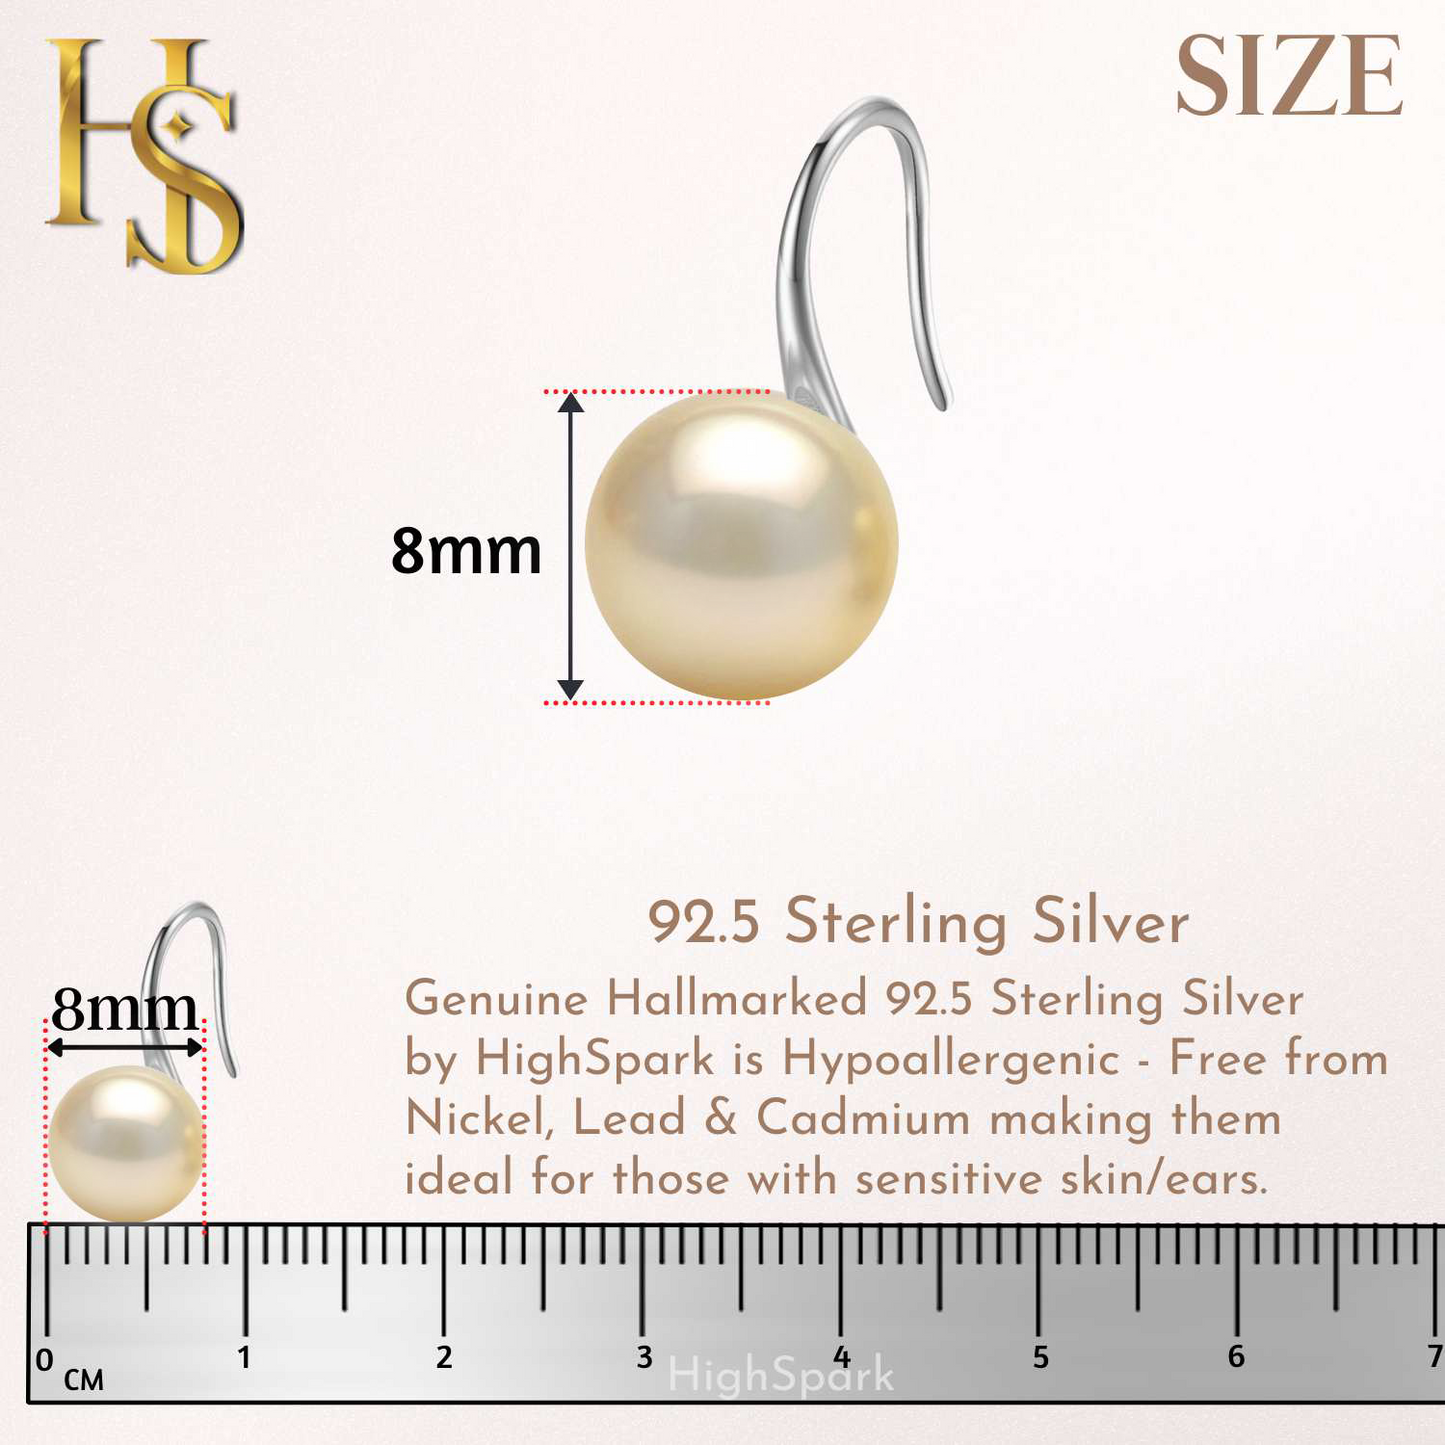 Pearl Light Gold Stylish Round Earrings in Hook Design